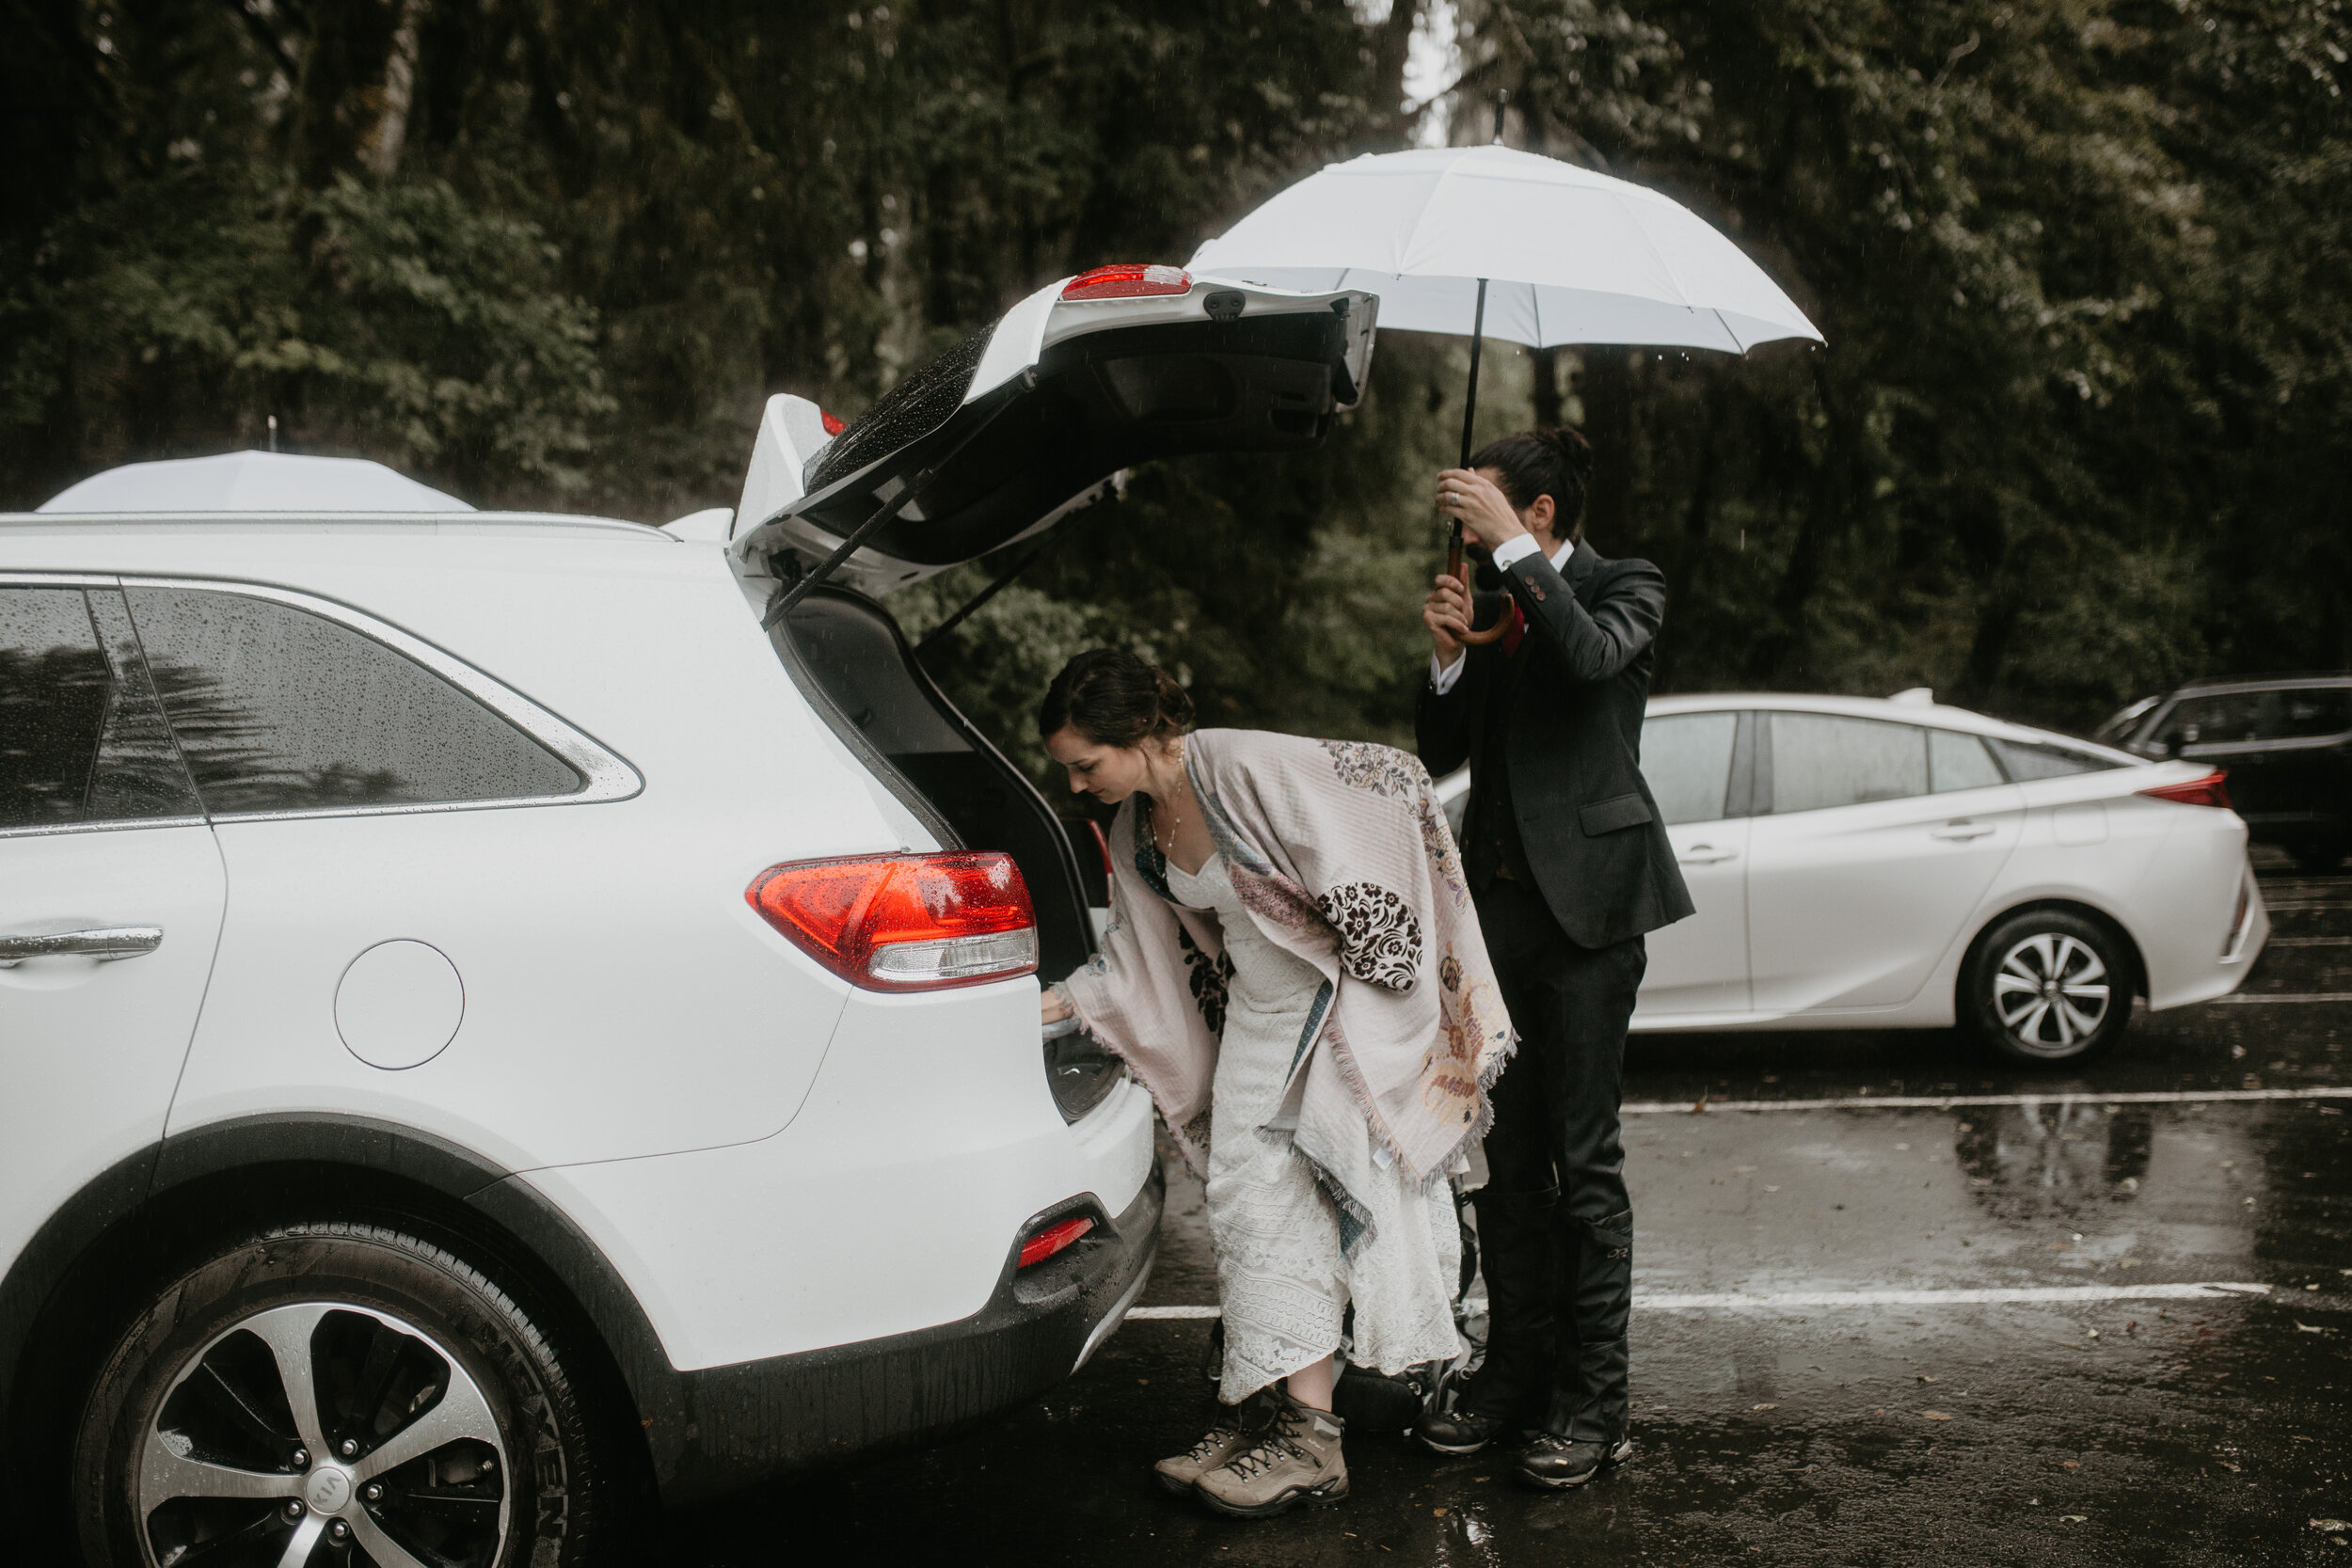 Nicole-Daacke-Photography-Olympic-national-park-elopement-photography-intimiate-elopement-in-olympic-peninsula-washington-state-rainy-day-ruby-beach-hoh-rainforest-elopement-inspiration-rainforest-pnw-elopement-photography-143.jpg